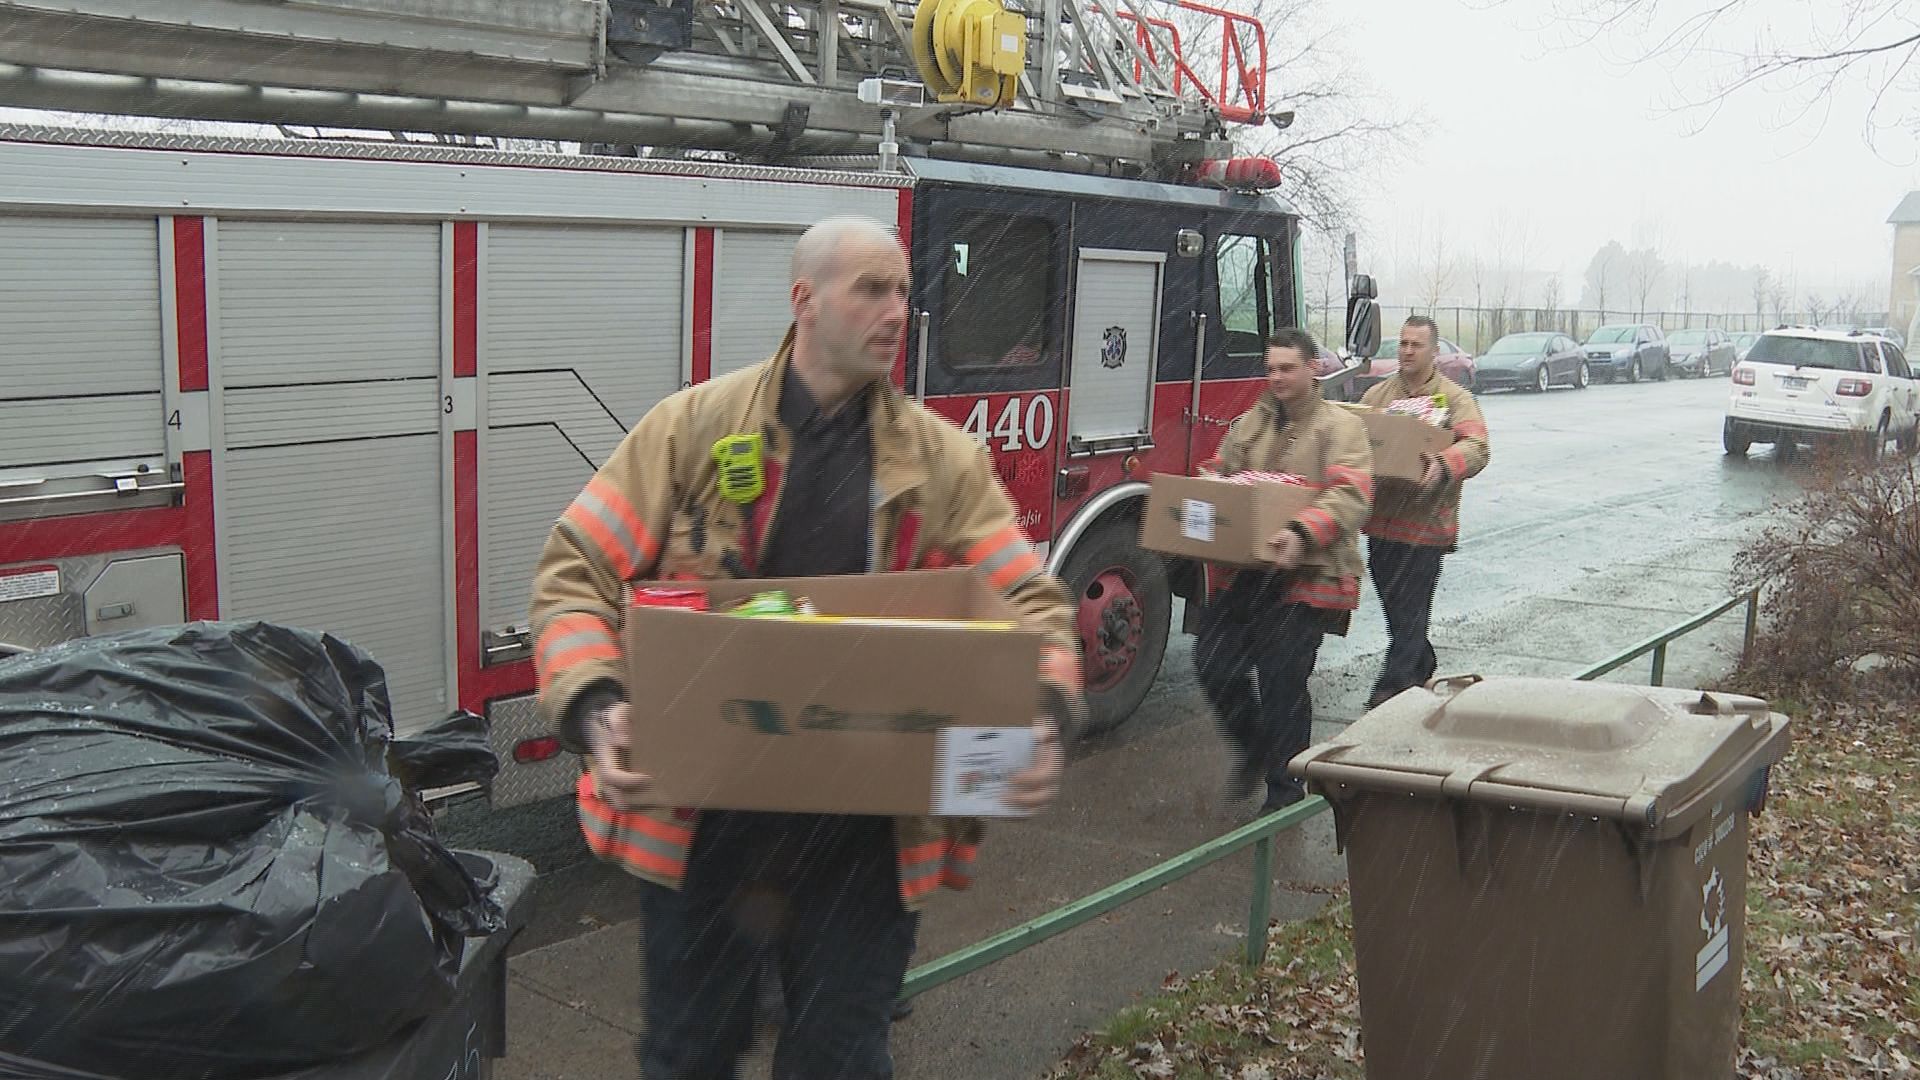 ‘This will help’: Montreal firefighters spread holiday cheer to those in need